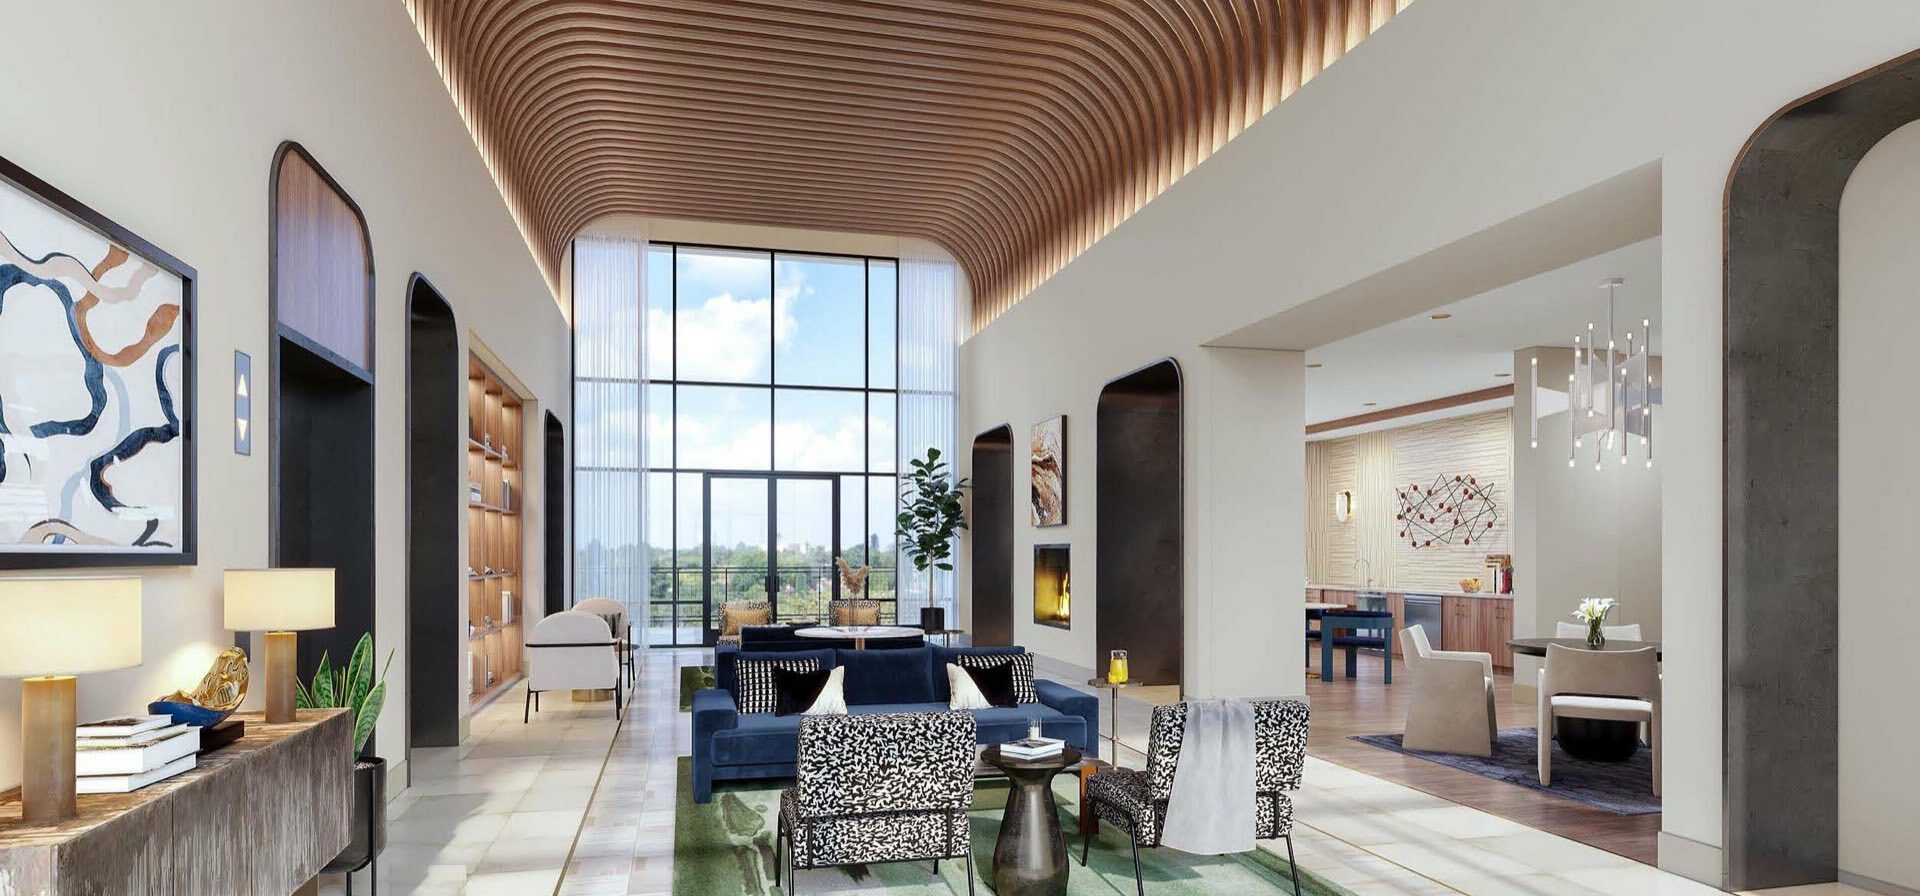 main lobby with floor to ceiling windows and lounge seating with designer furniture